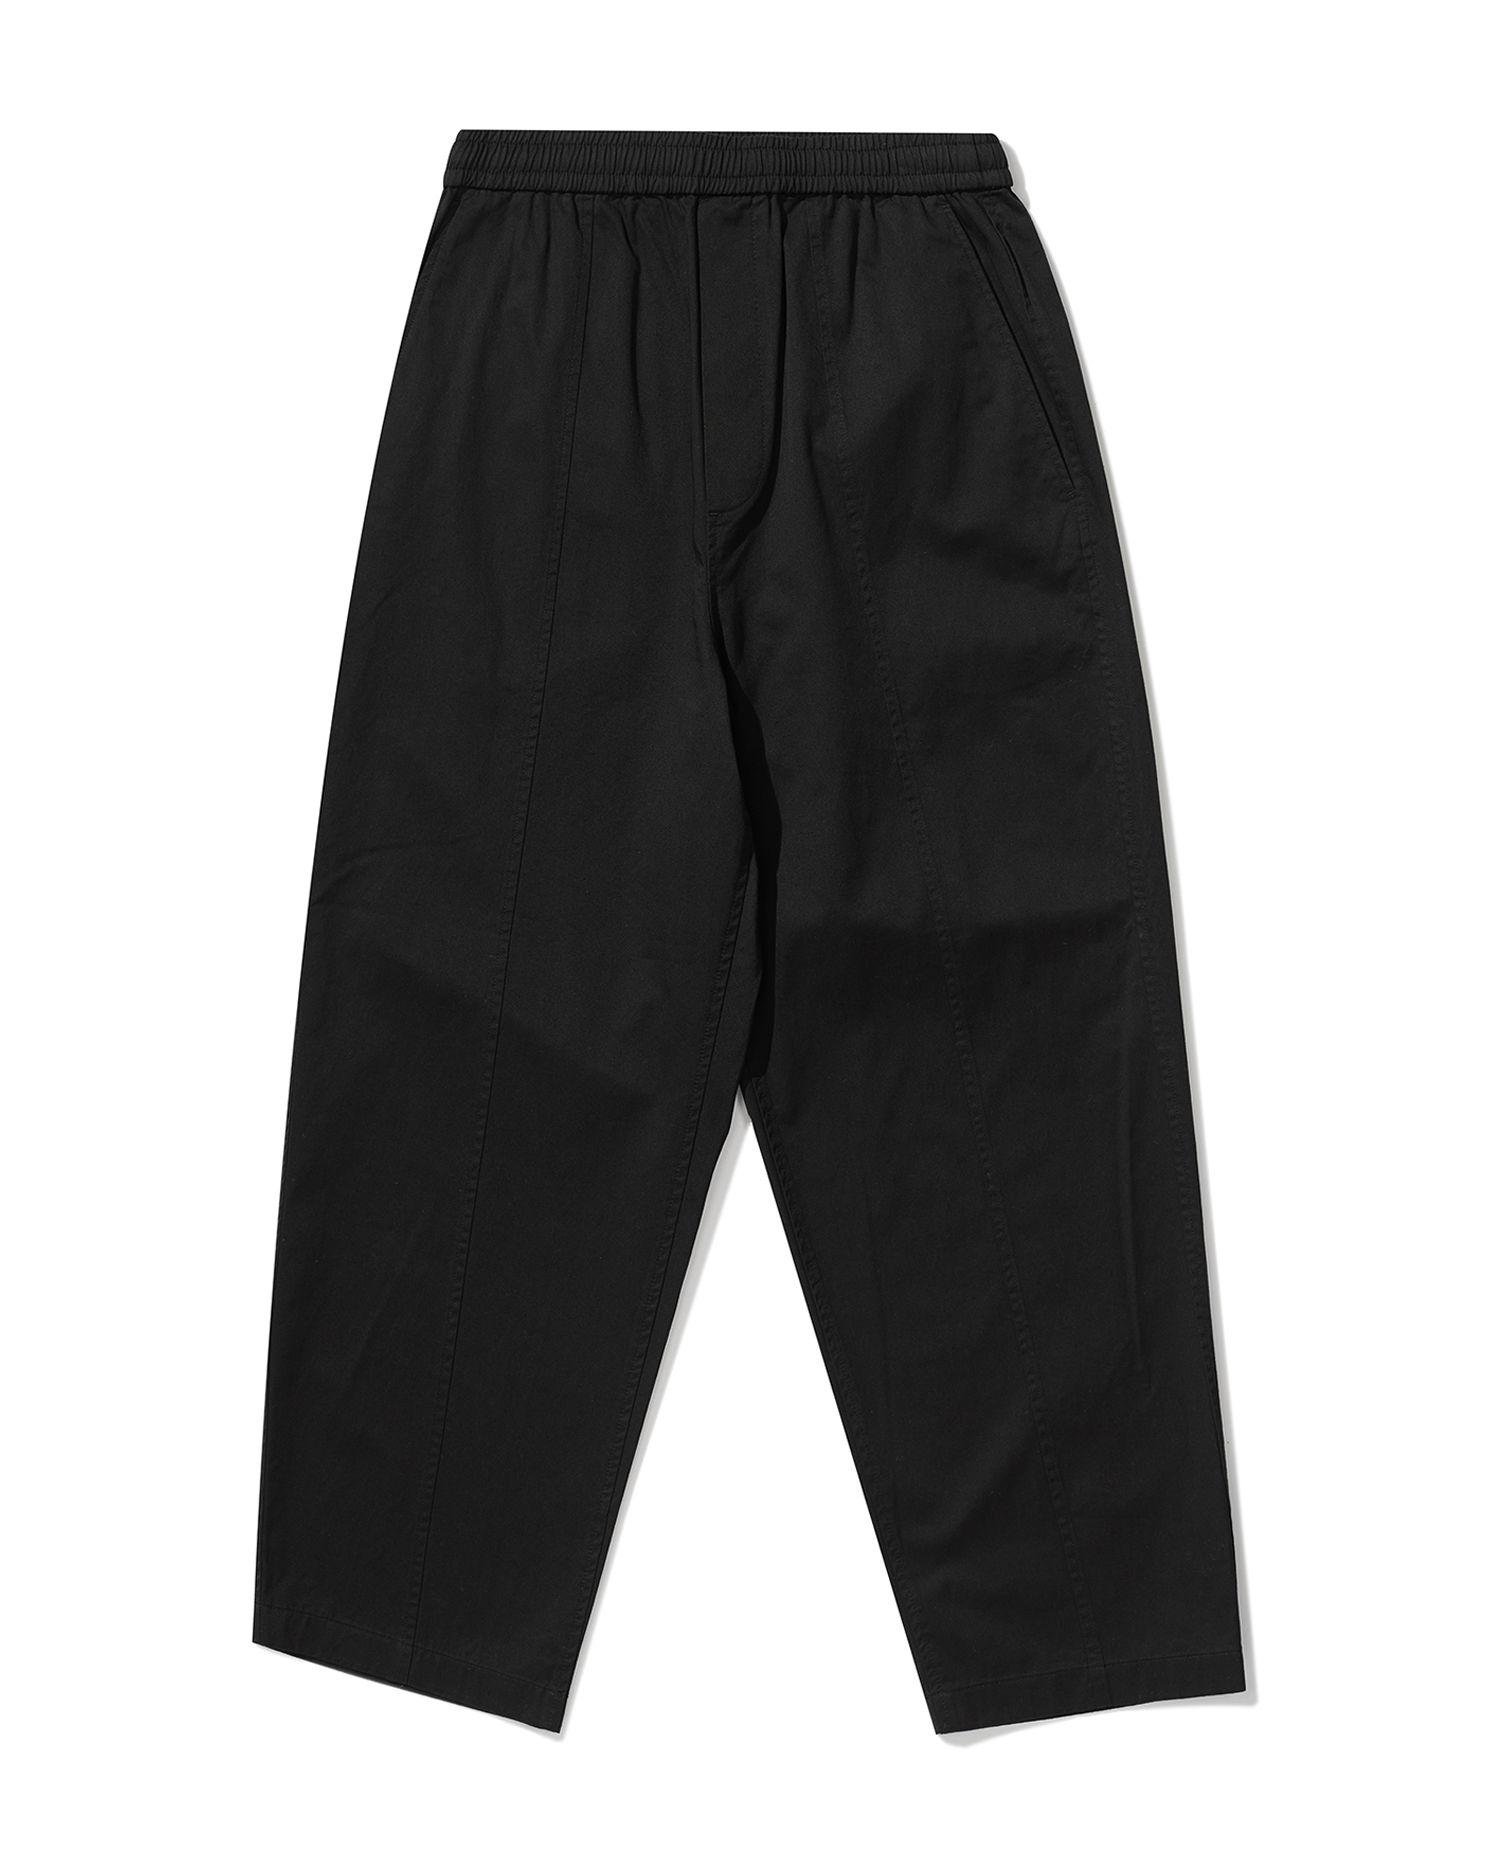 Low-crotch cropped pants by COVERNAT